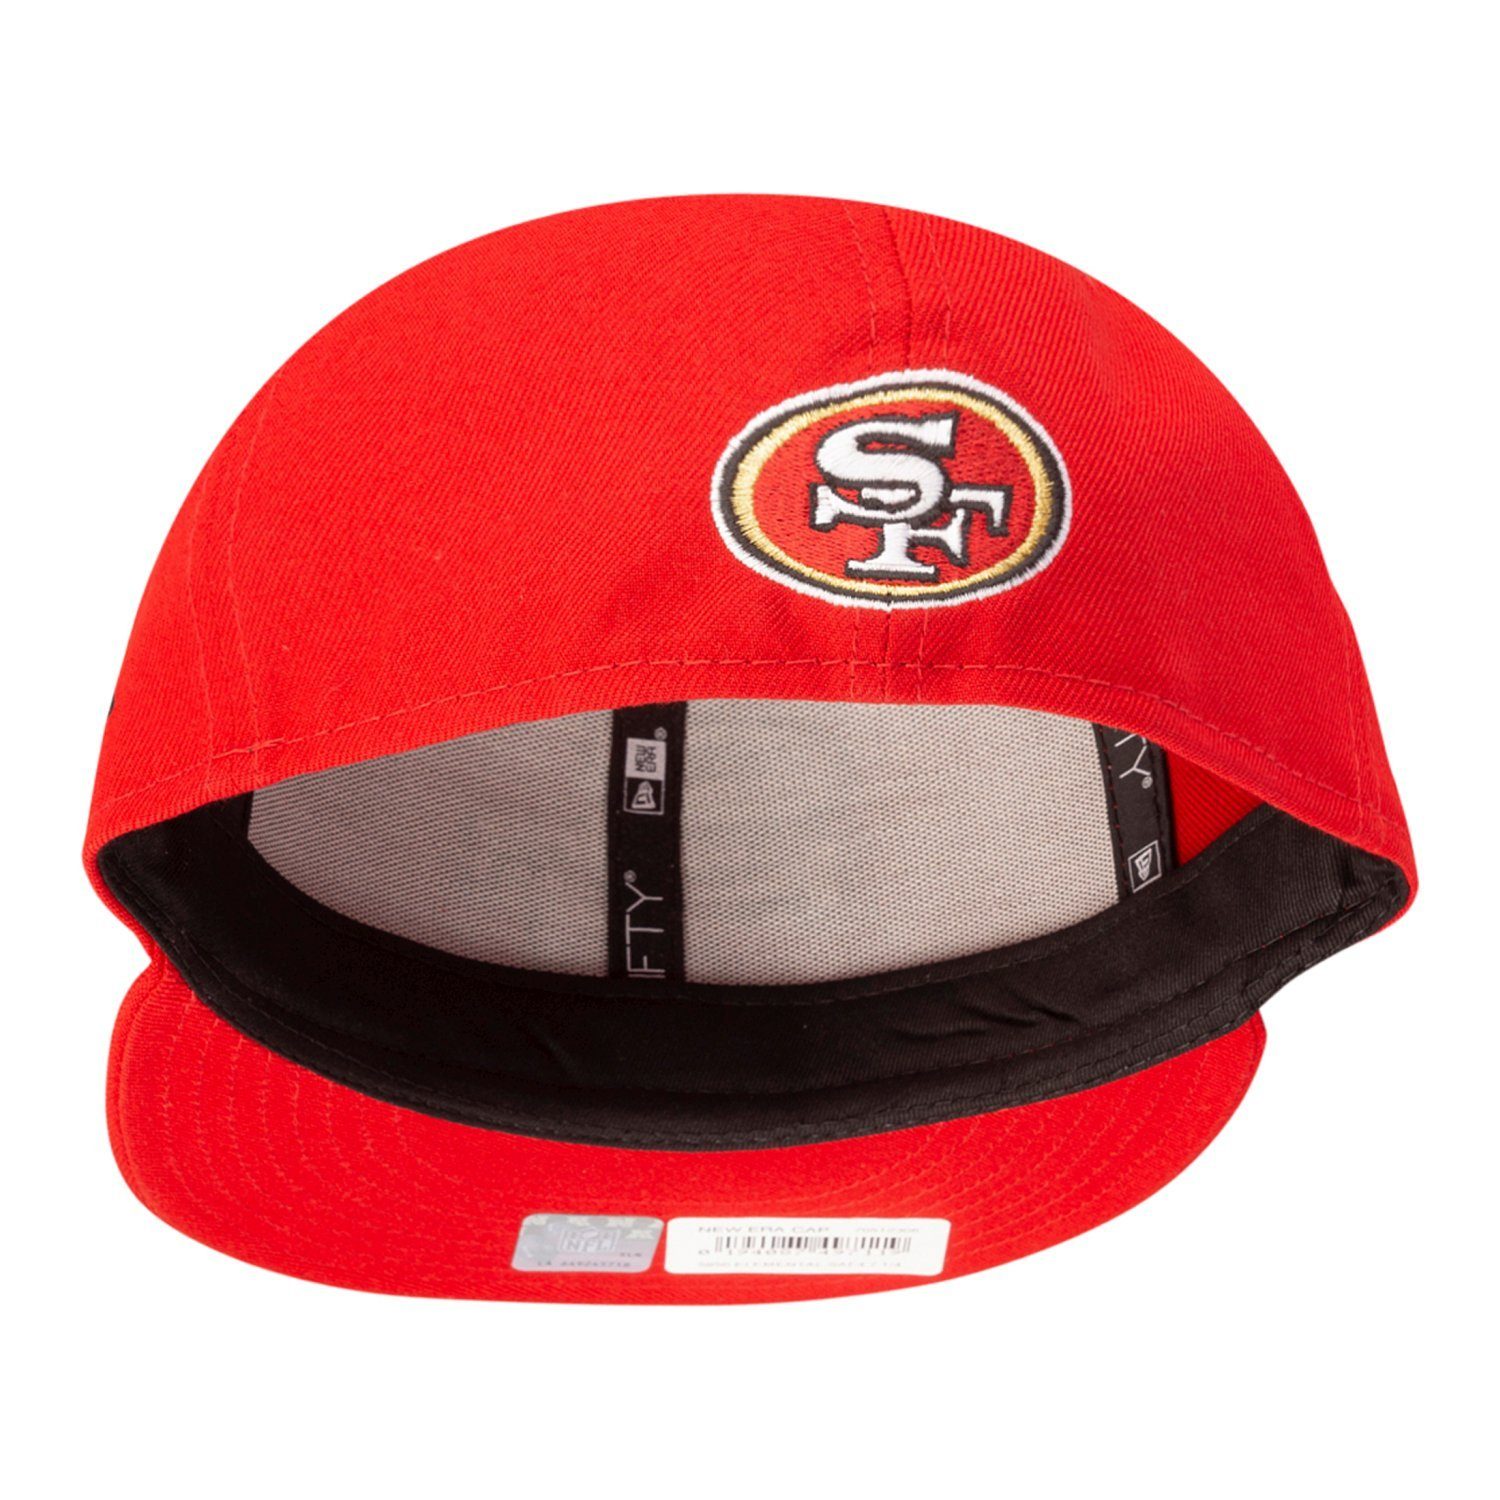 Fitted Francisco Era San New ELEMENTAL 49ers 59Fifty Cap